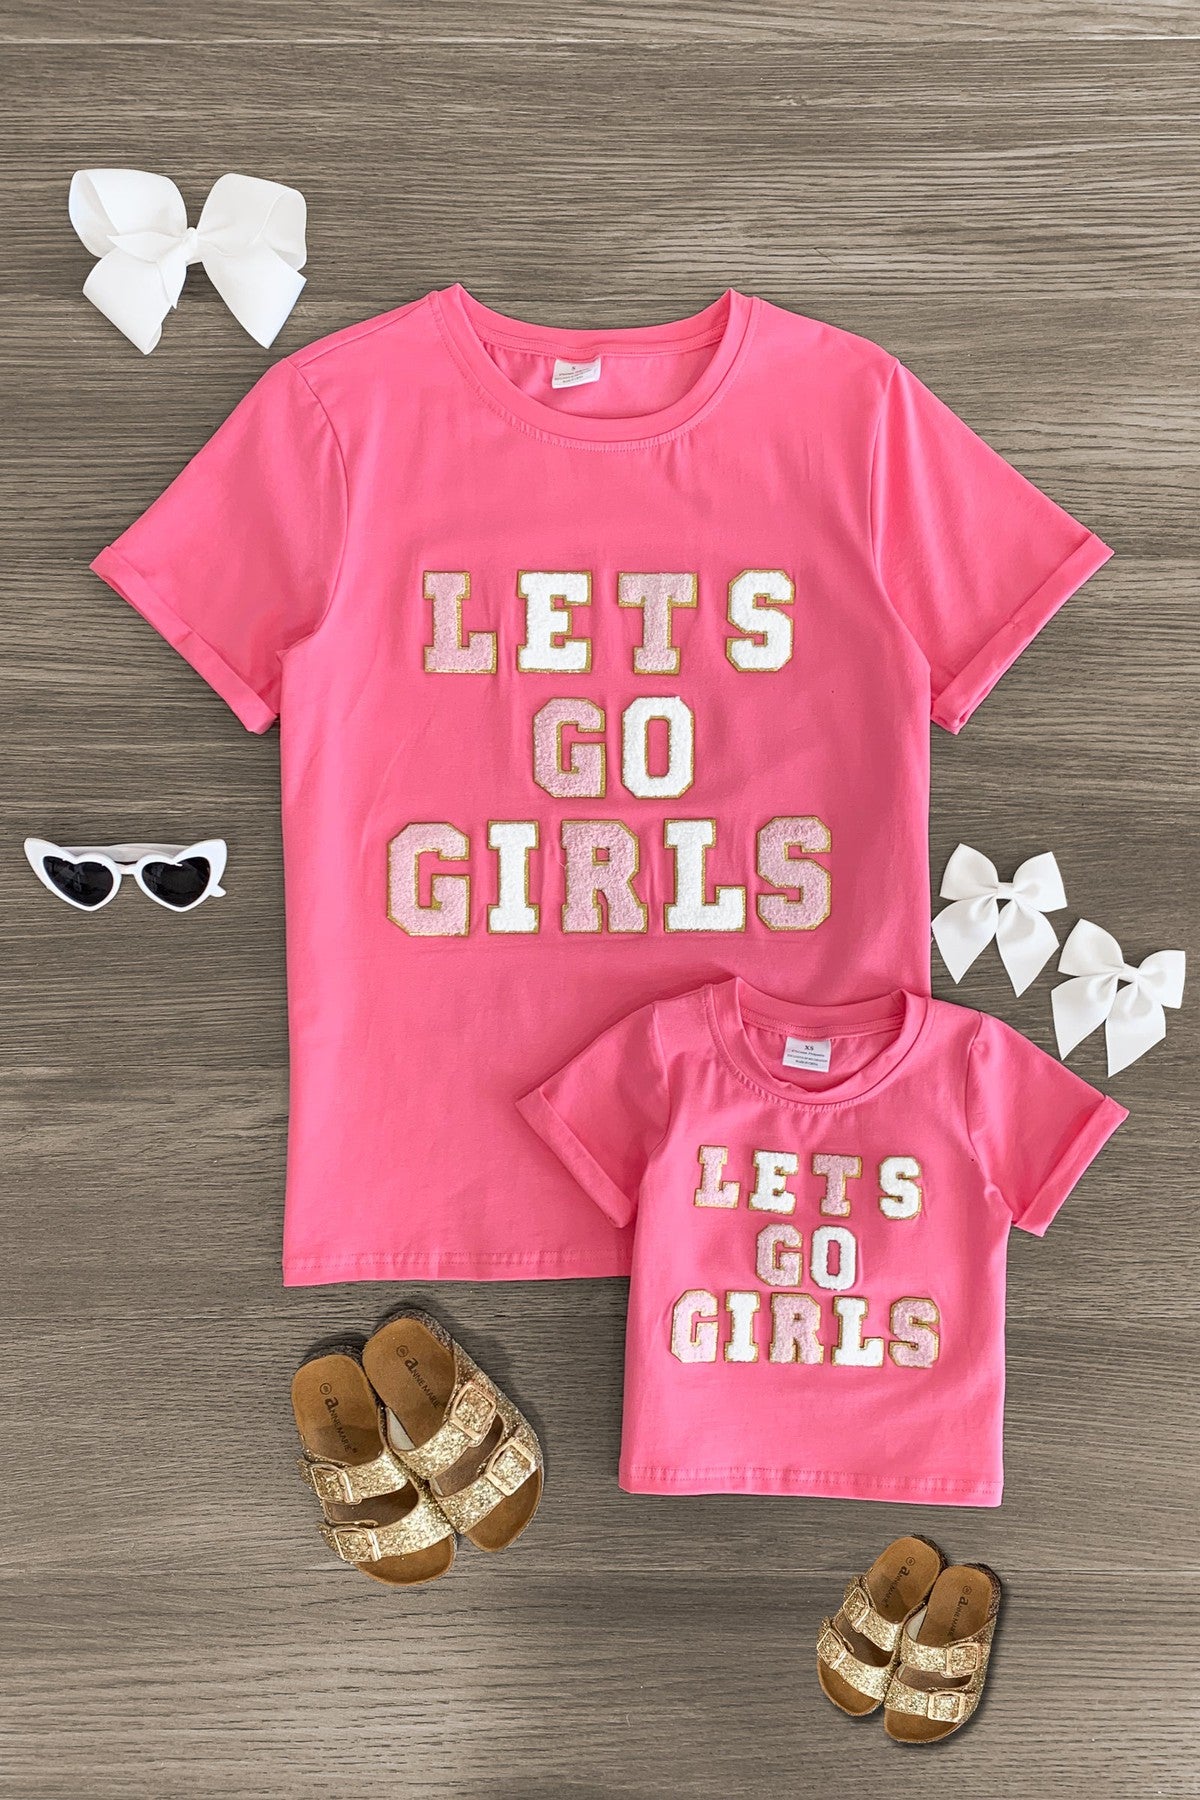 Mom & Me - "Let's Go Girls" Pink Chenille Patch Top - Sparkle in Pink